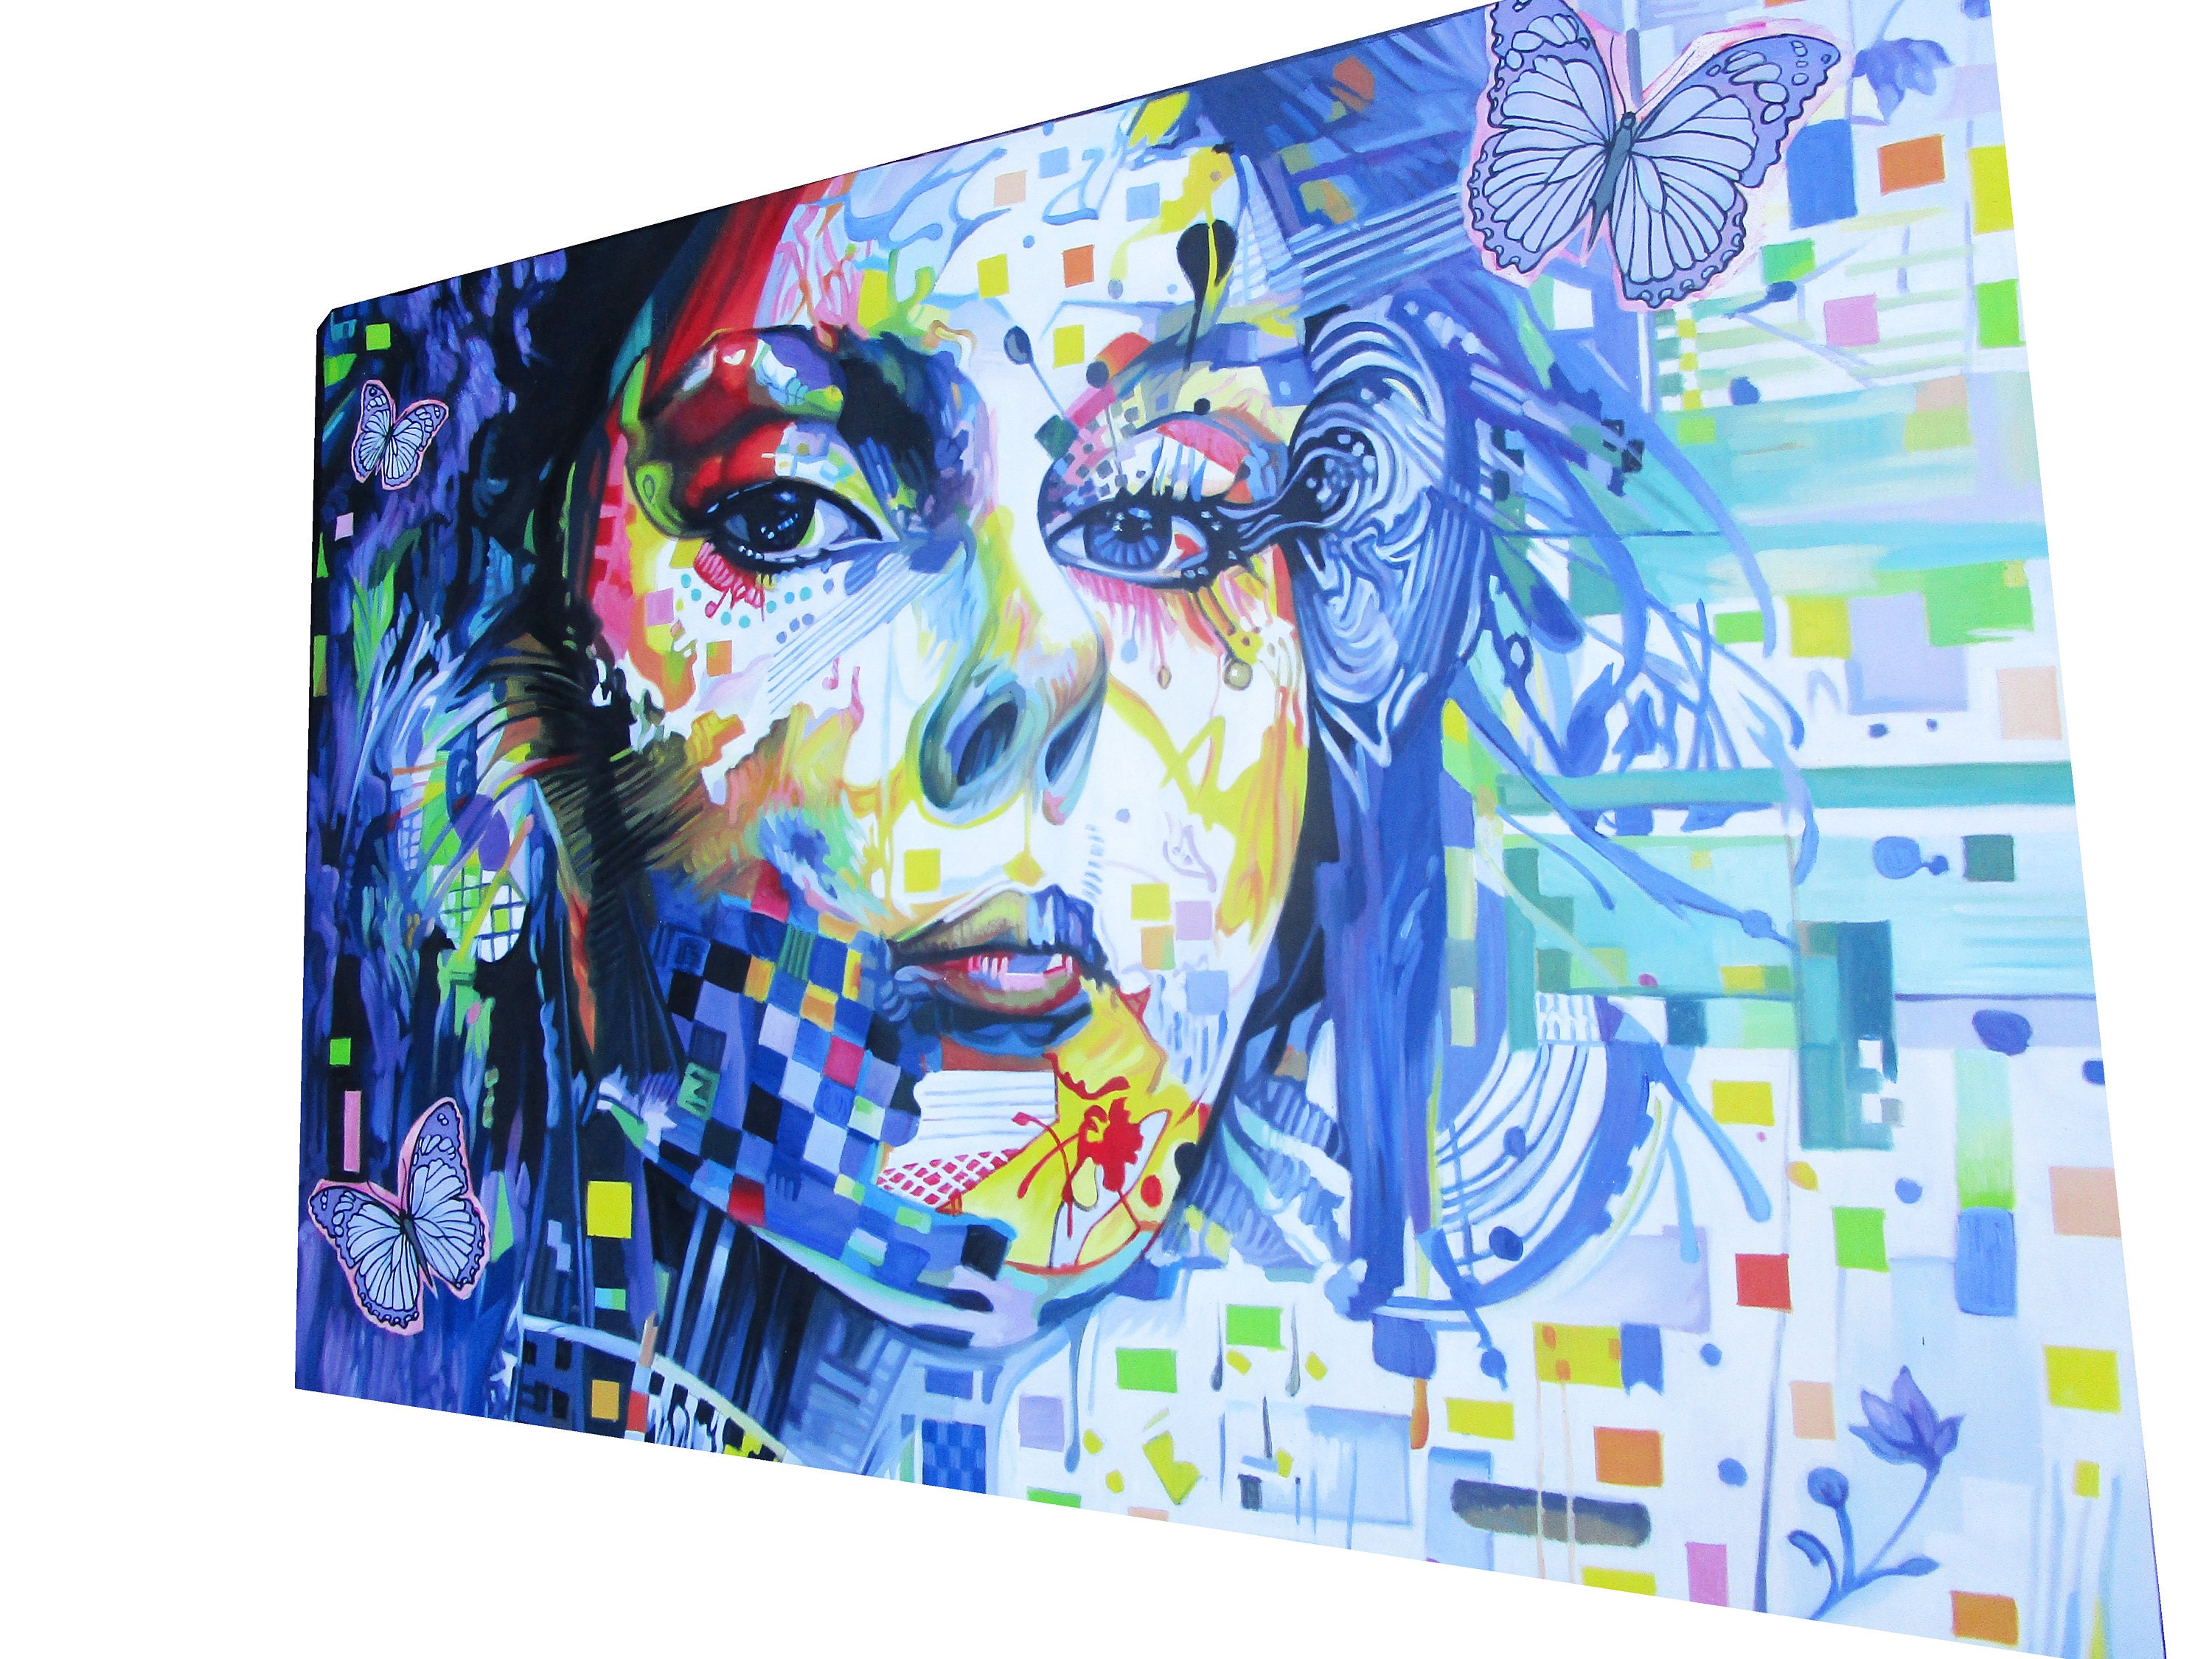 Huge Urban princess  art canvas from Australia face girl abstract Quality 